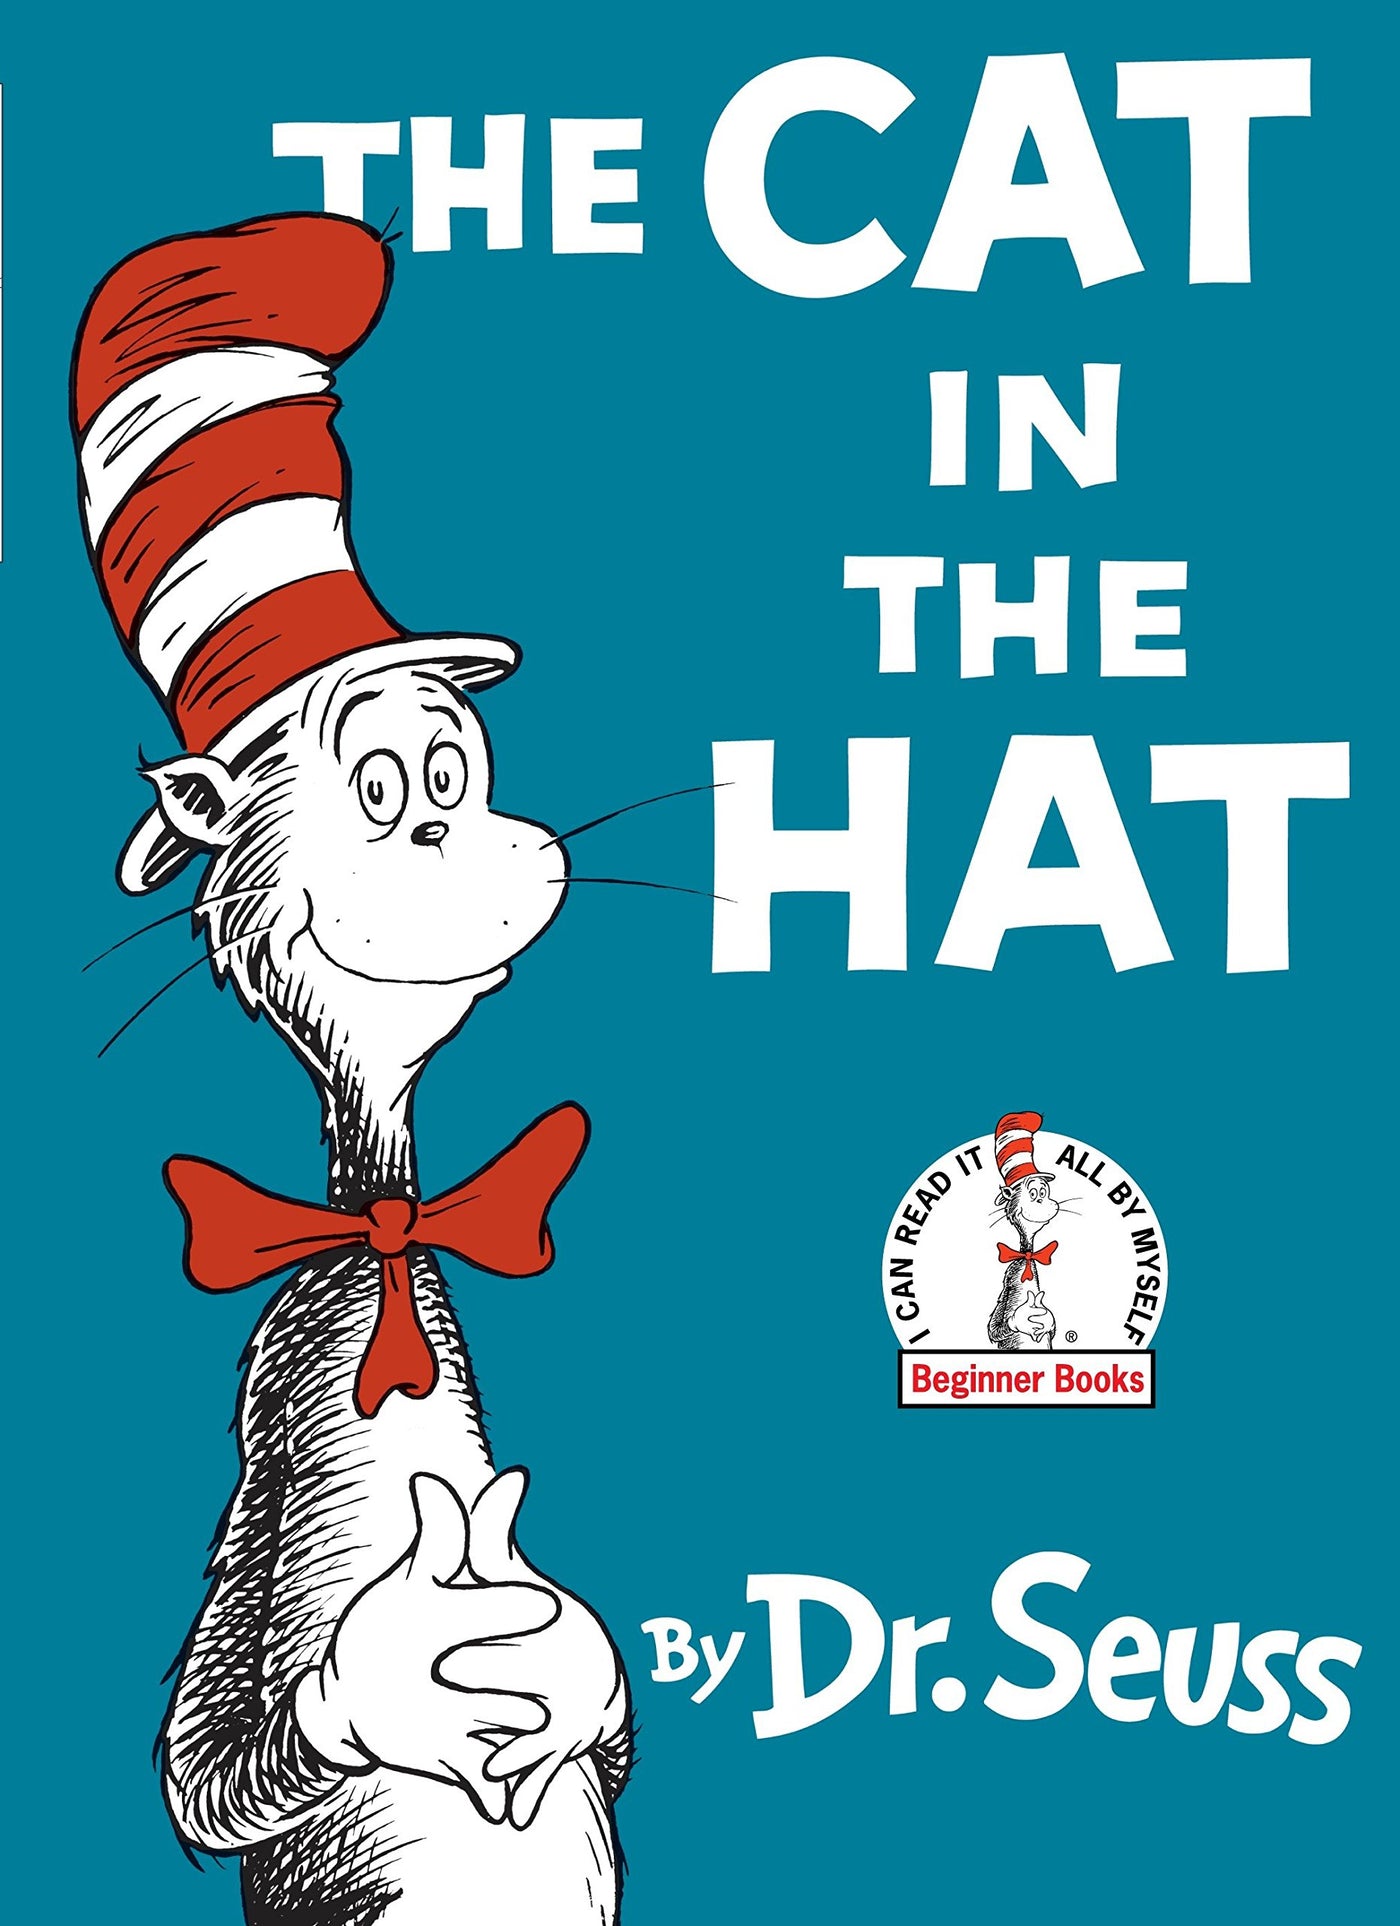 The Cat in the Hat - Madison's Niche 